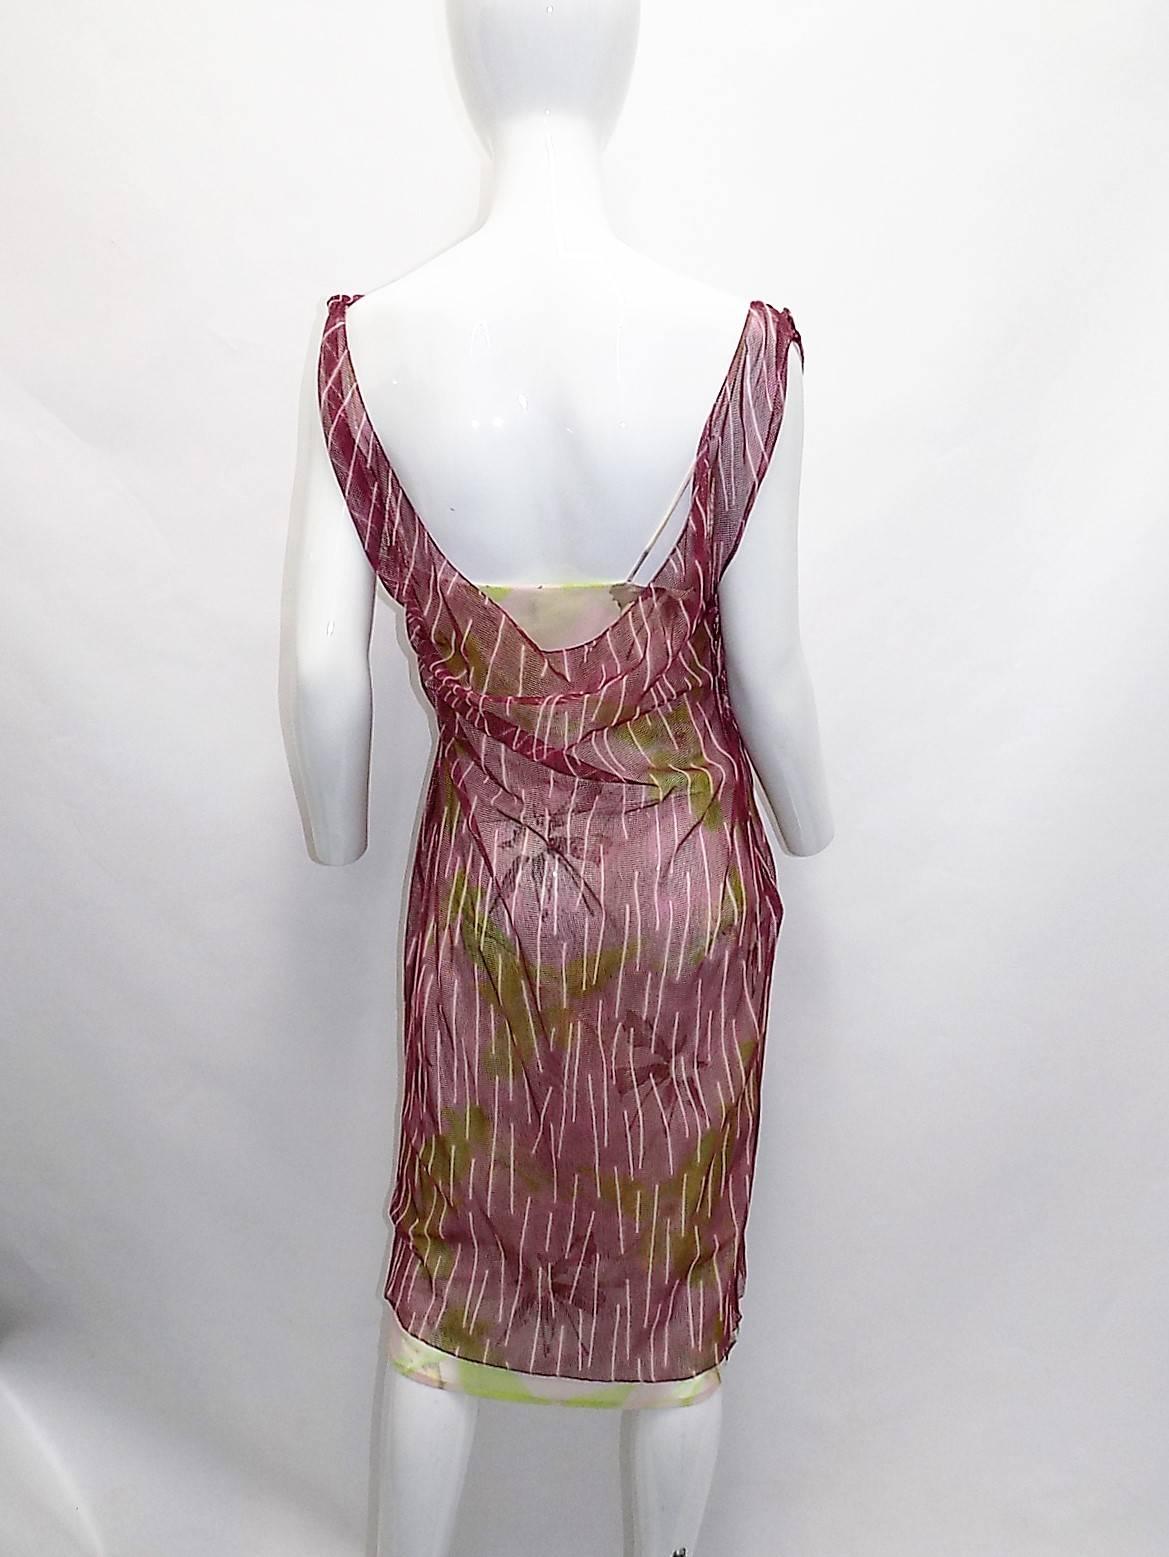 Never worn with tags still attached and original retail price of $3410.00 Gianni Versace Couture  beautiful double layered summer dress. Combination of two different prints in perfect harmony.  Nylon , cotton and spandex blend.Size 44
Bust 38 hips